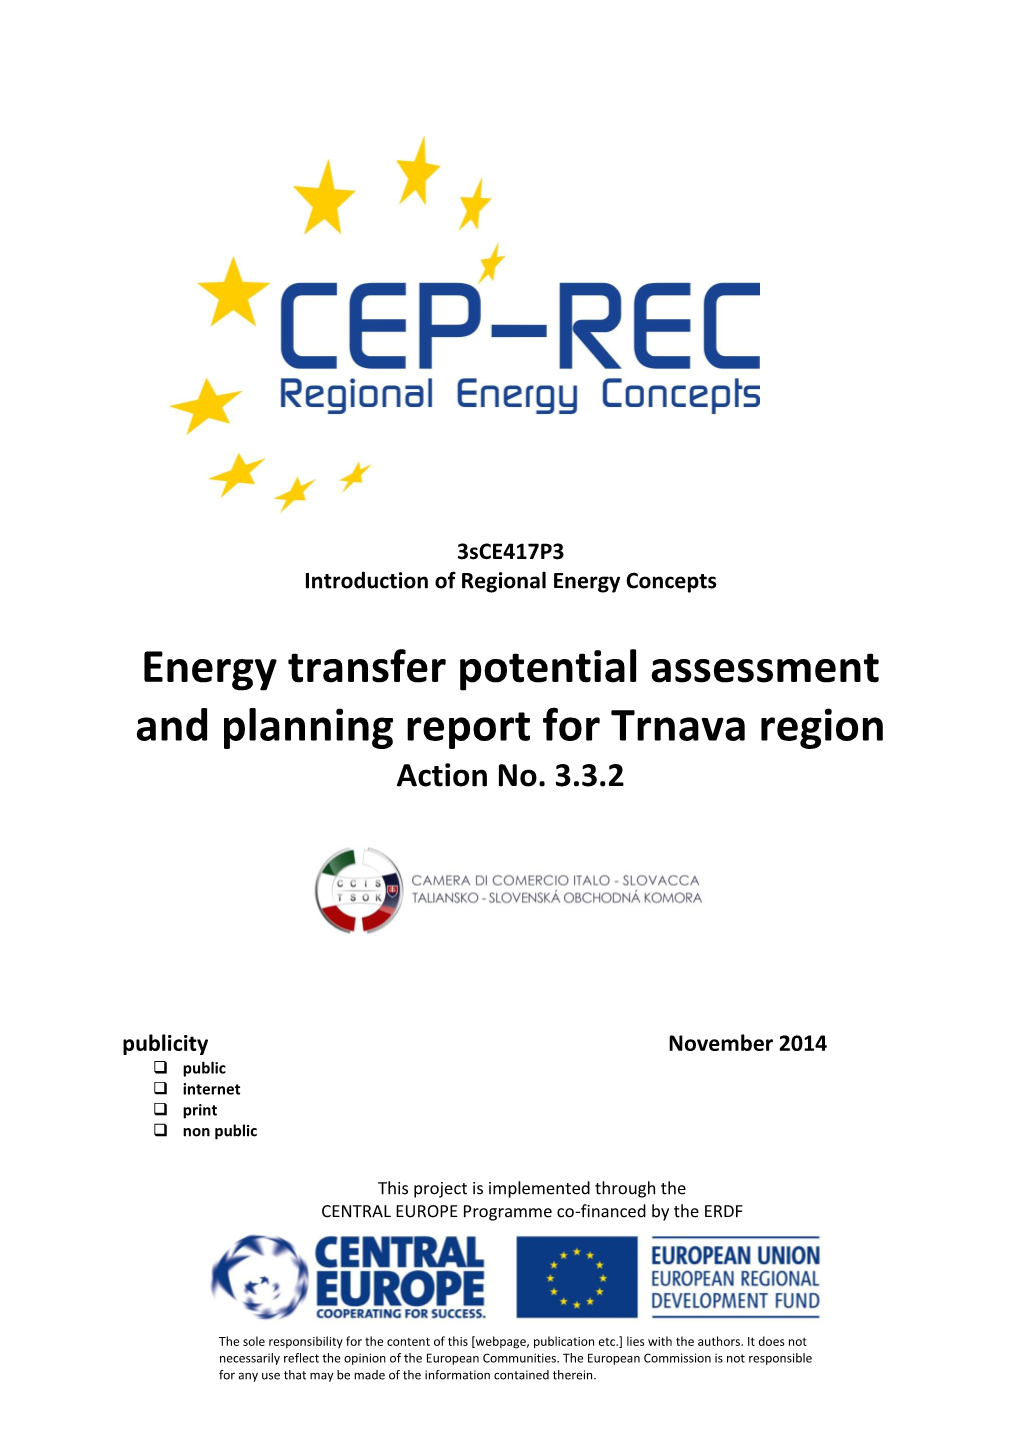 Energy Transfer Potential Assessment and Planning Report for Trnava Region Action No